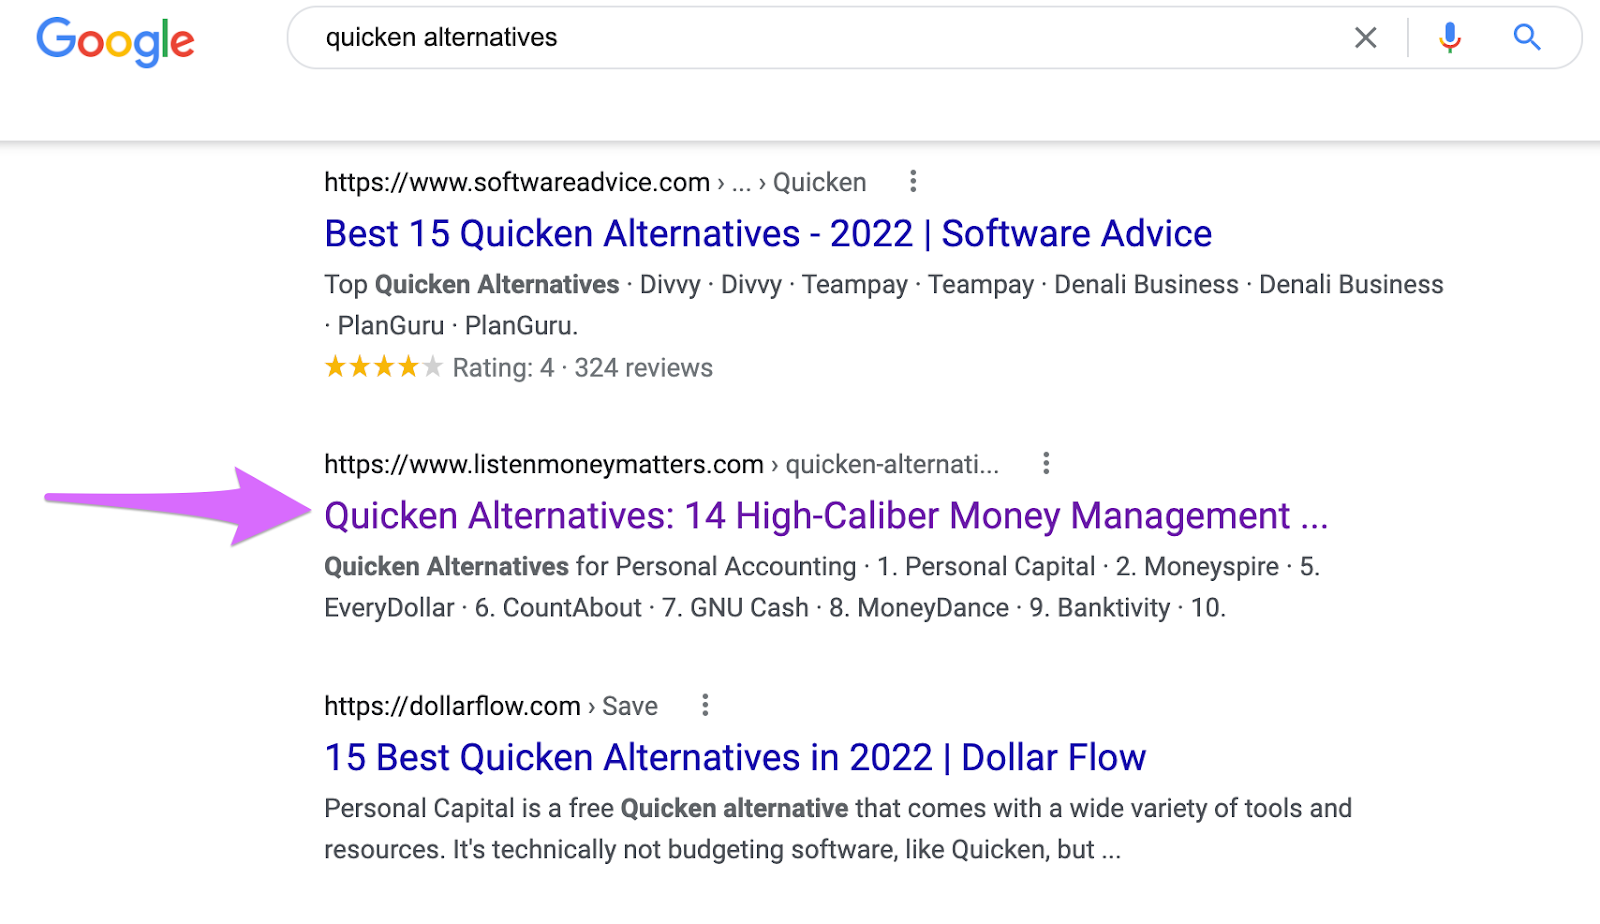 ranking for quicken alternatives in google search engine results